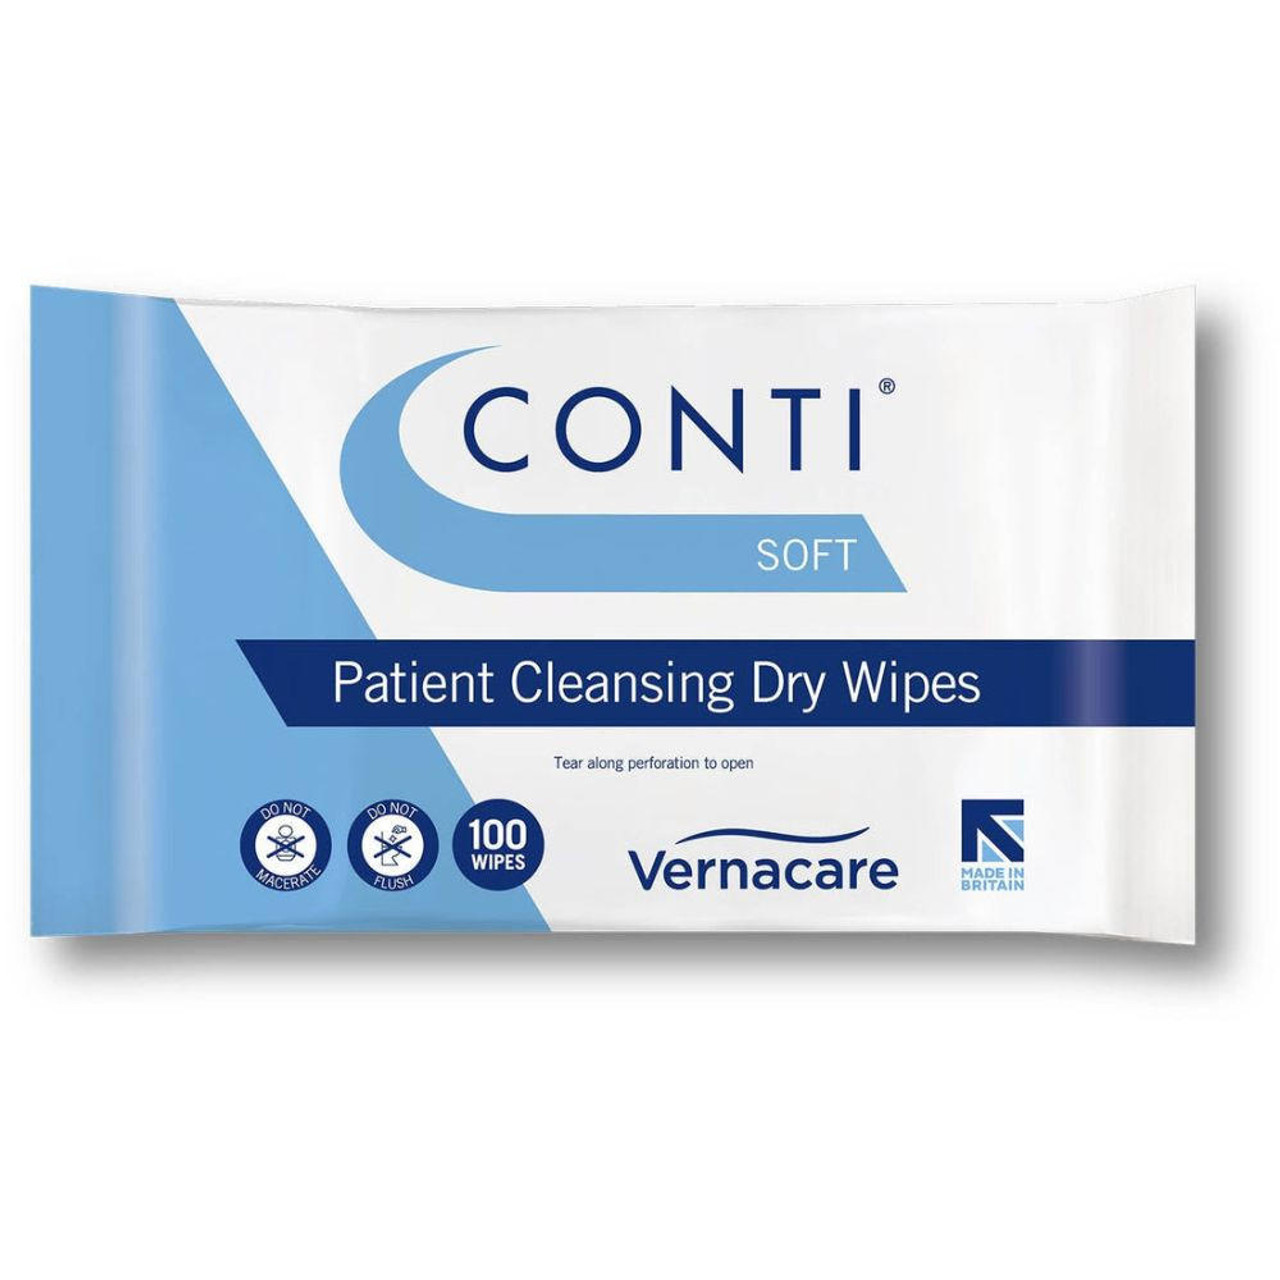 FBF1051P Conti Soft Large Dry Patient Cleansing Wipes Pack of 100 32x28cm   